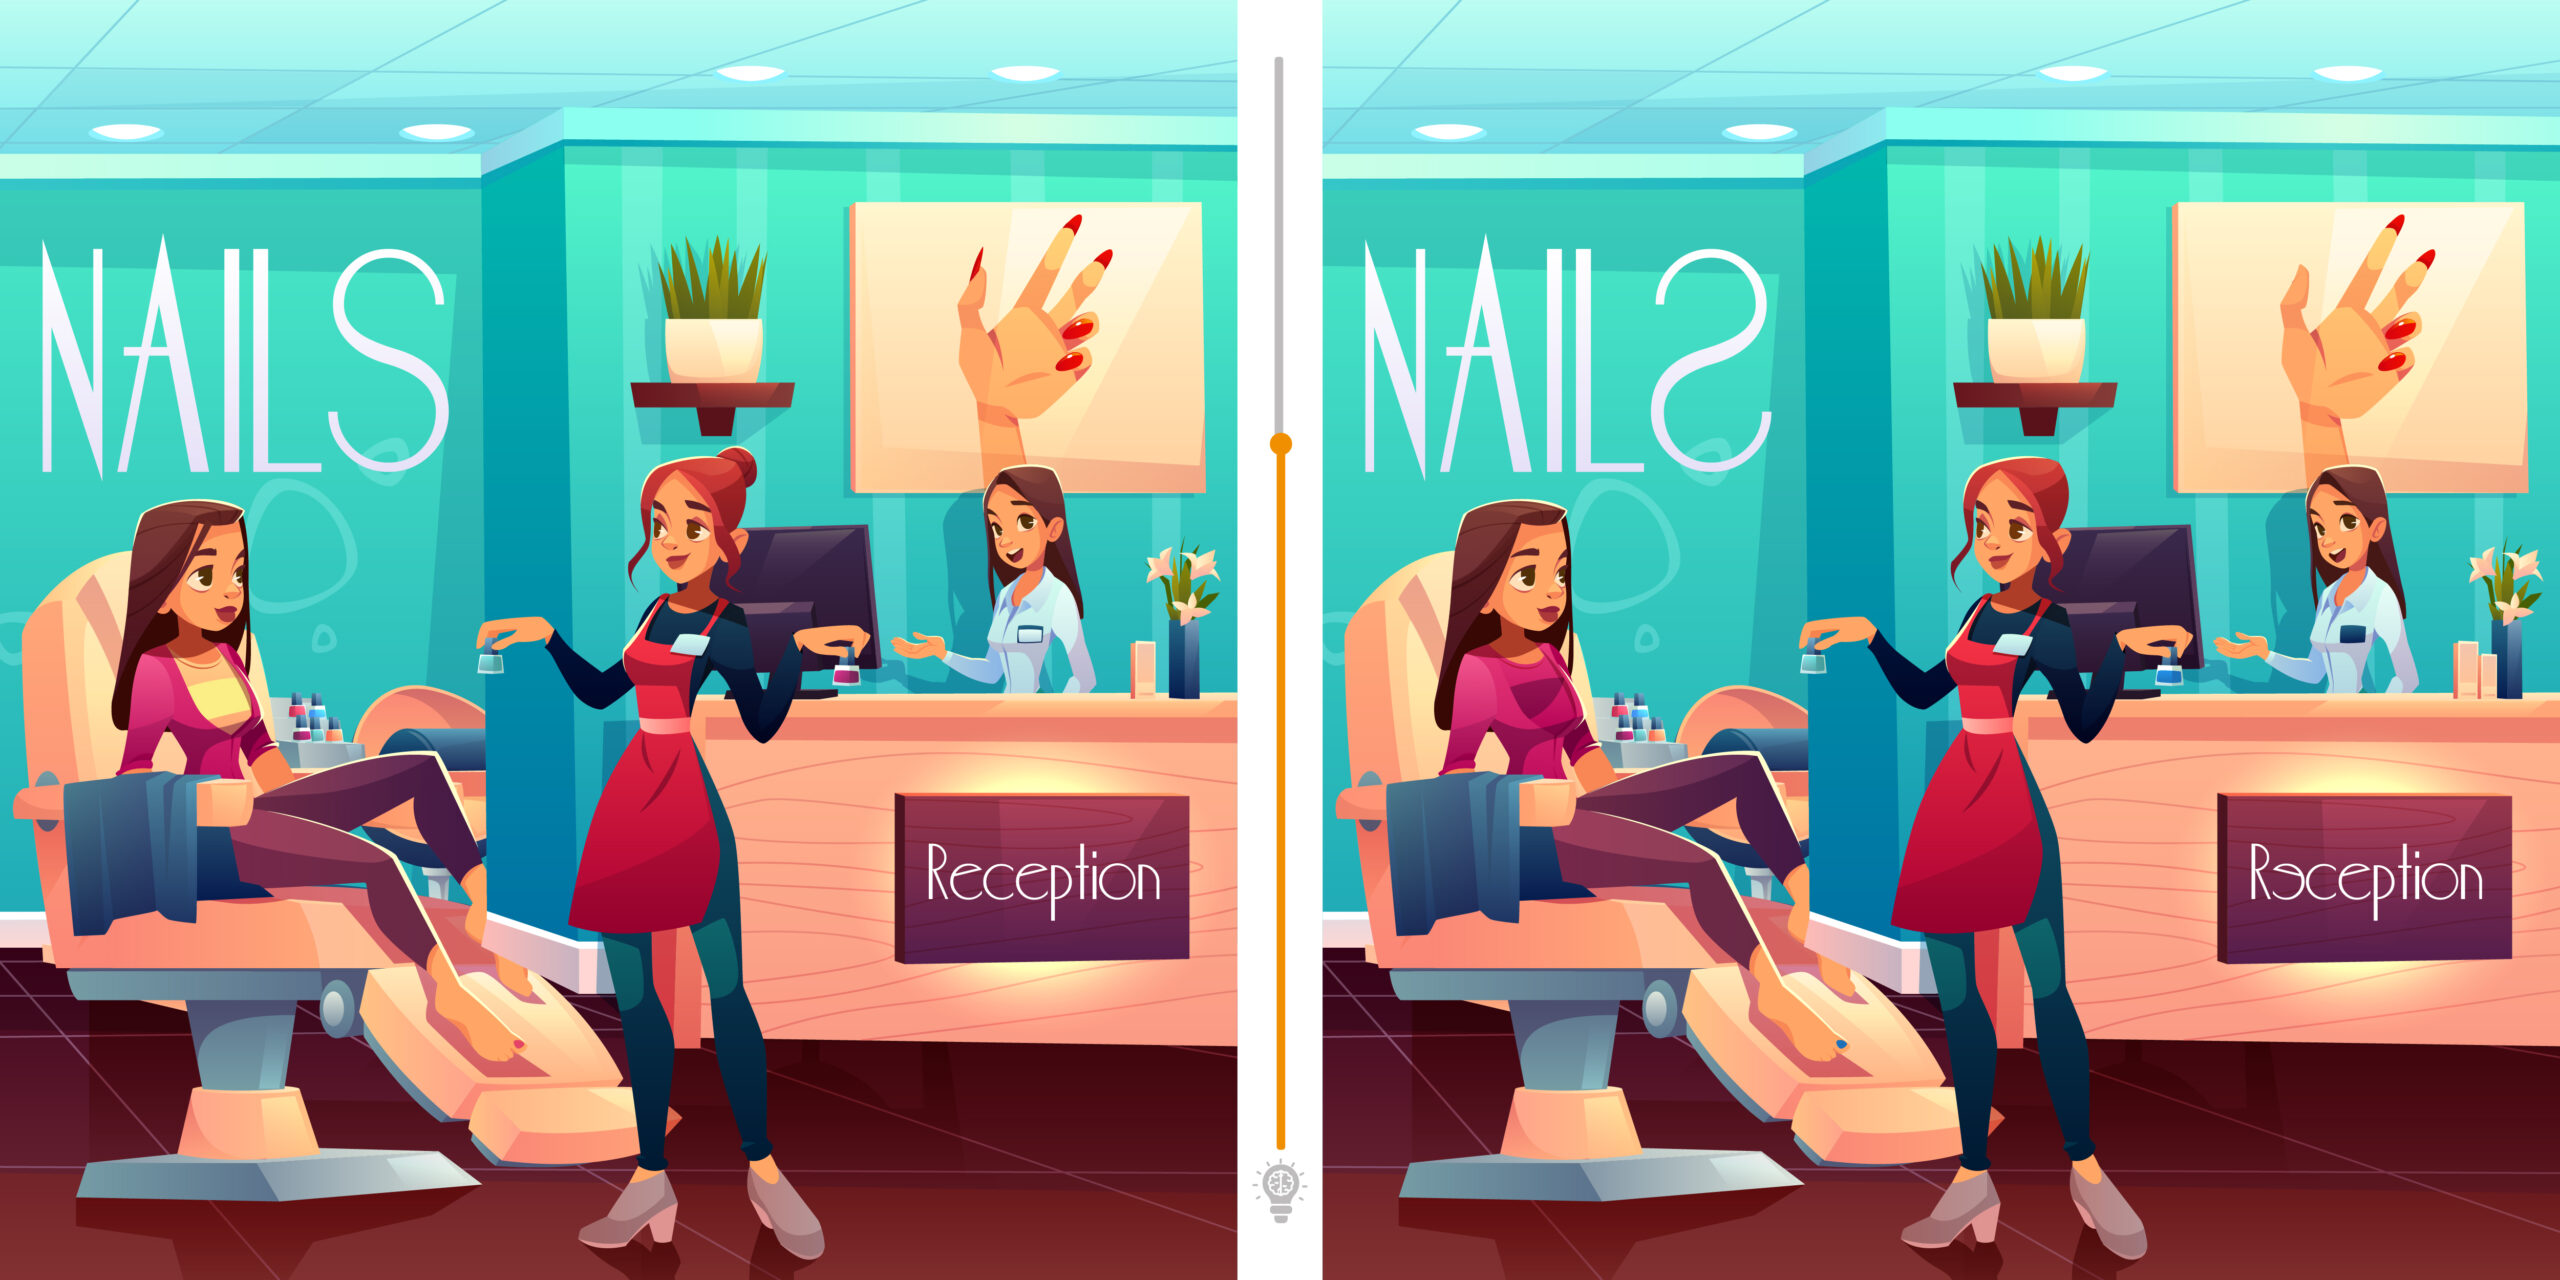 Visual challenge: Find the 10 differences between these two images of a nail salon in less than 25 seconds!